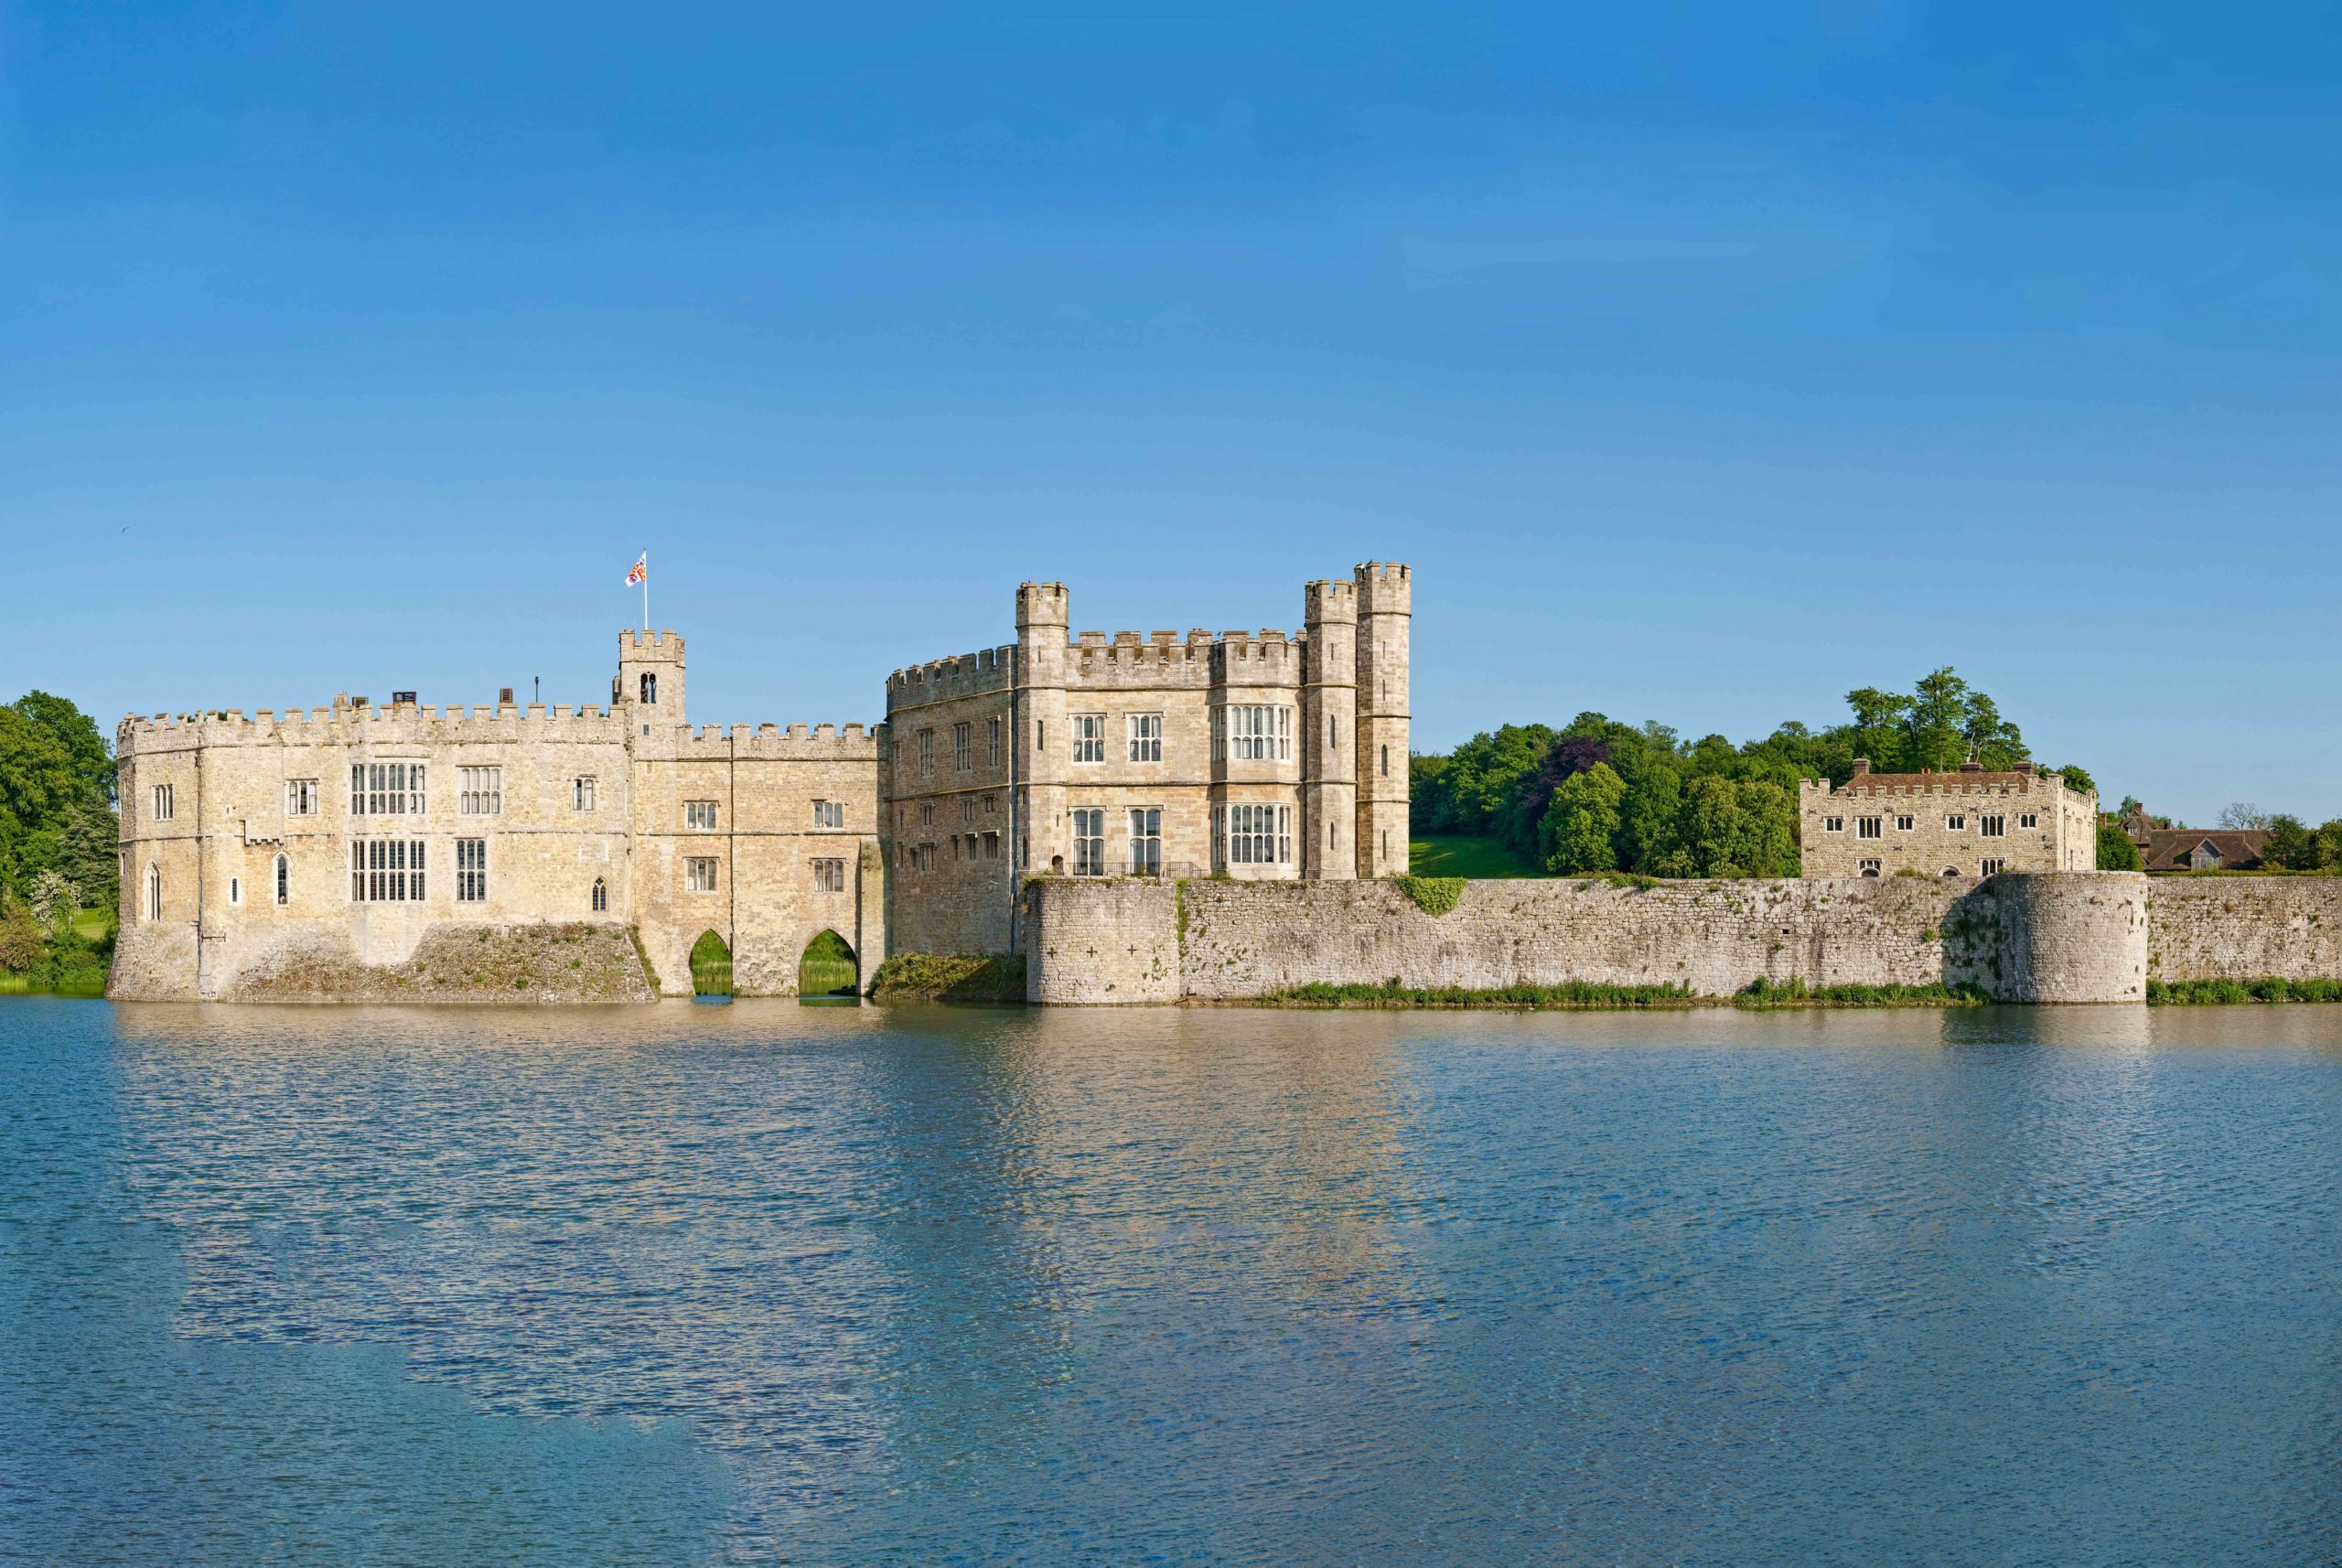 Leeds Castle © Diliff - licence [CC BY-SA 3.0] from Wikimedia Commons